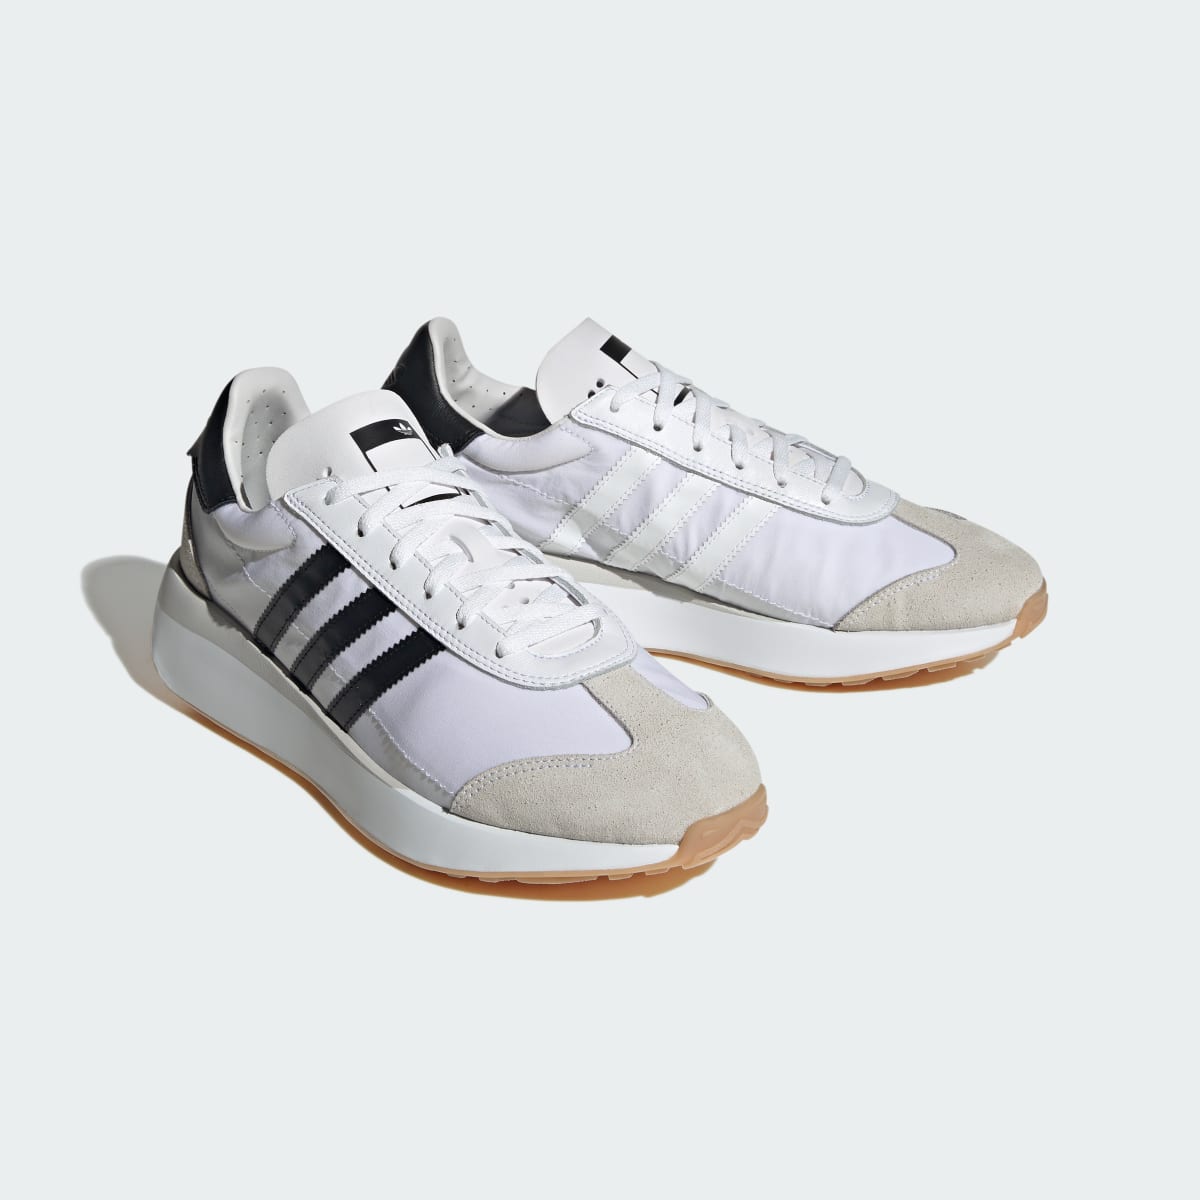 Adidas Chaussure Country XLG. 5